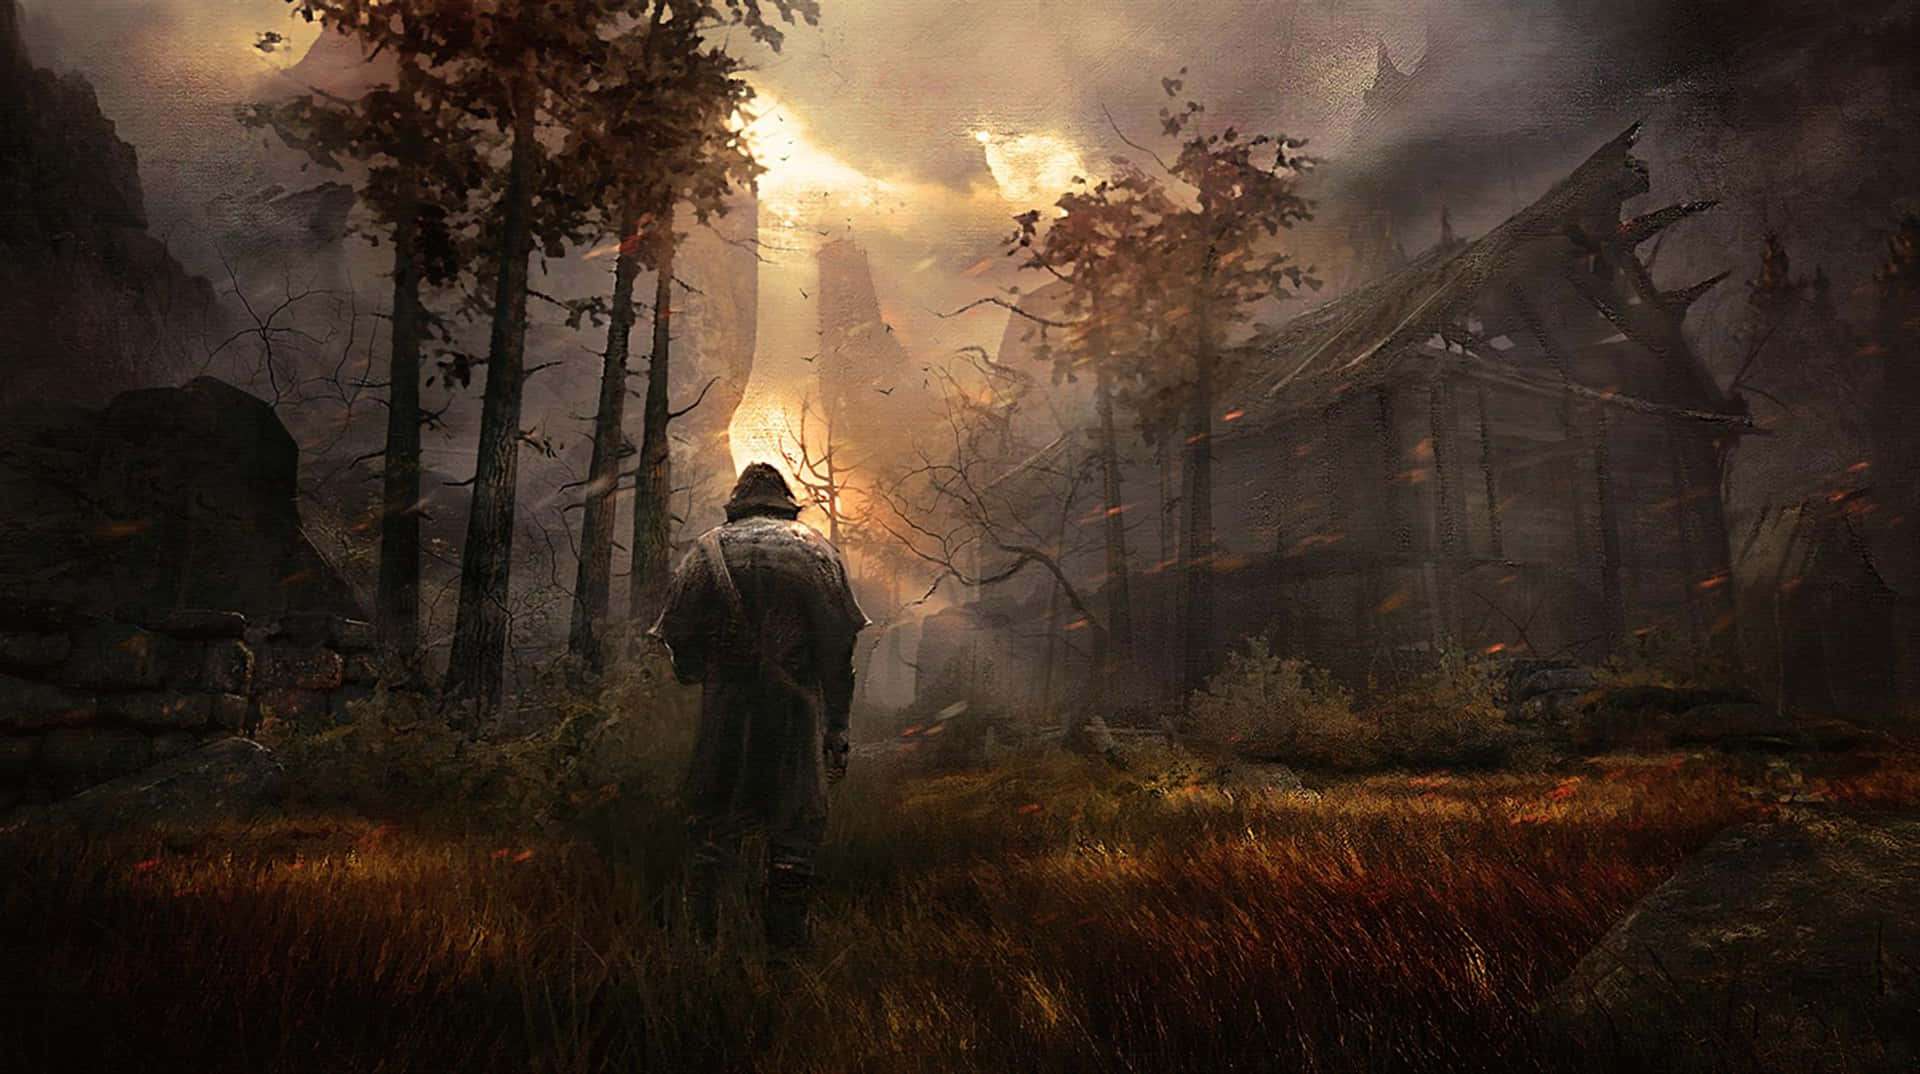 Hd Greedfall Background Warrior In The Woods Wallpaper